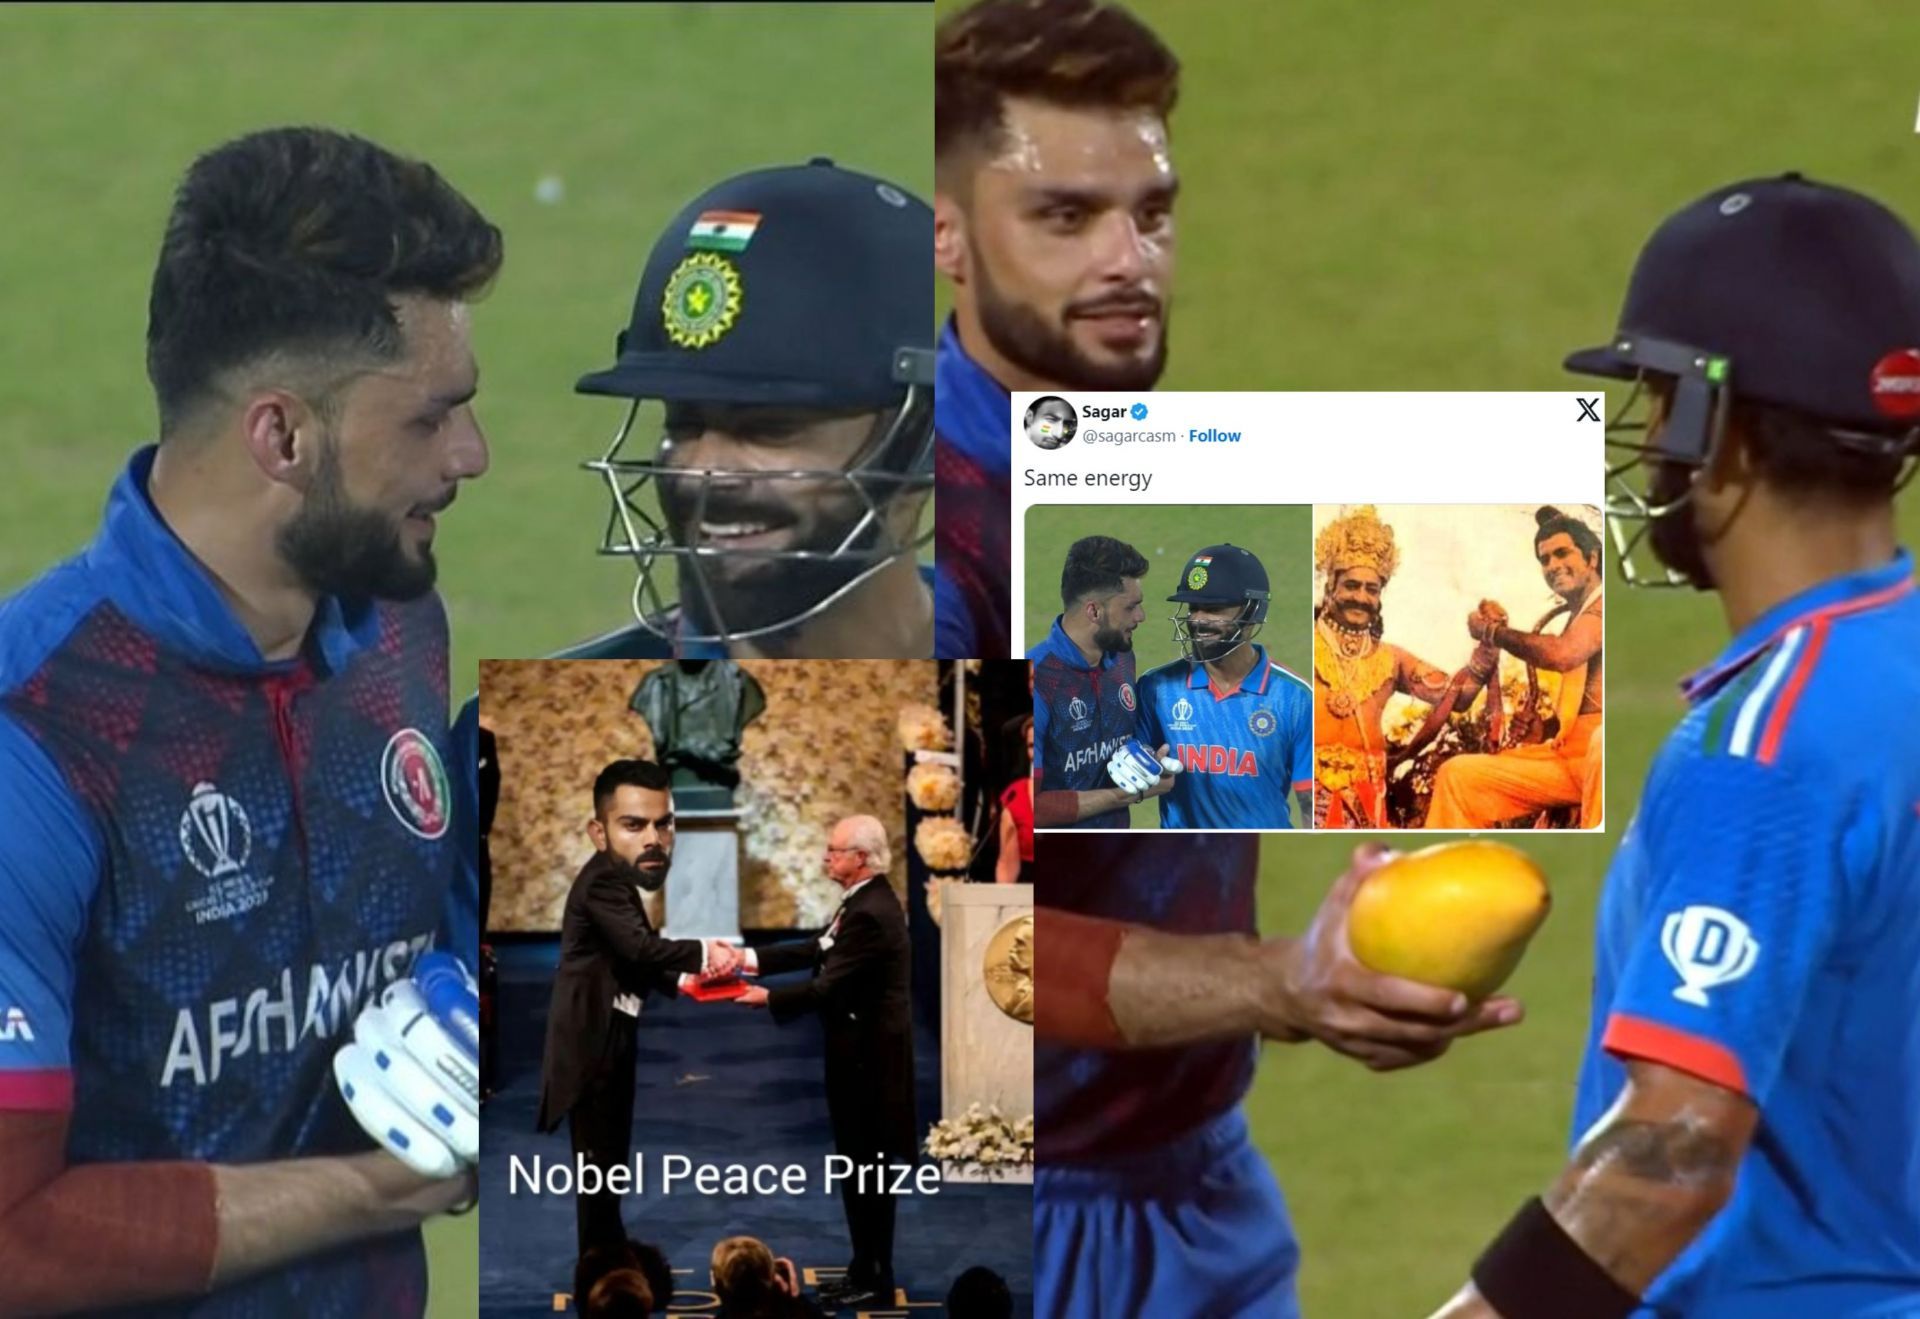 Fans react after Virat Kohli and Naveen-ul-Haq embrace each other during IND vs AFG clash.